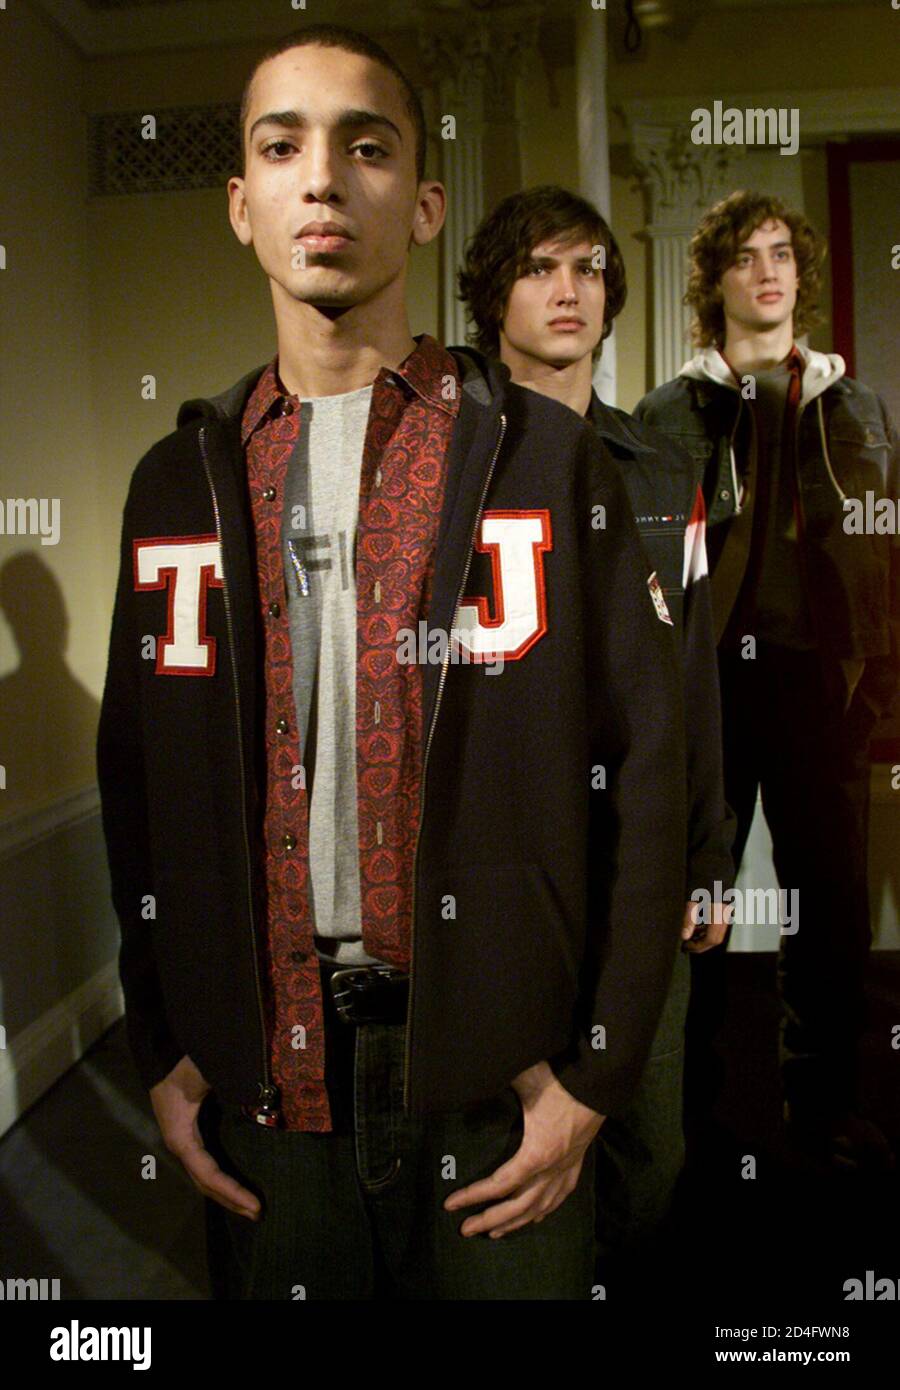 Designer Tommy Hilfiger's Men's Fall 2001 presentation, shown in New York  on February 8, 2001, "celebrates his long 'love story' with collegiate prep  and Ivy League style." Model Makoto (R) wears a